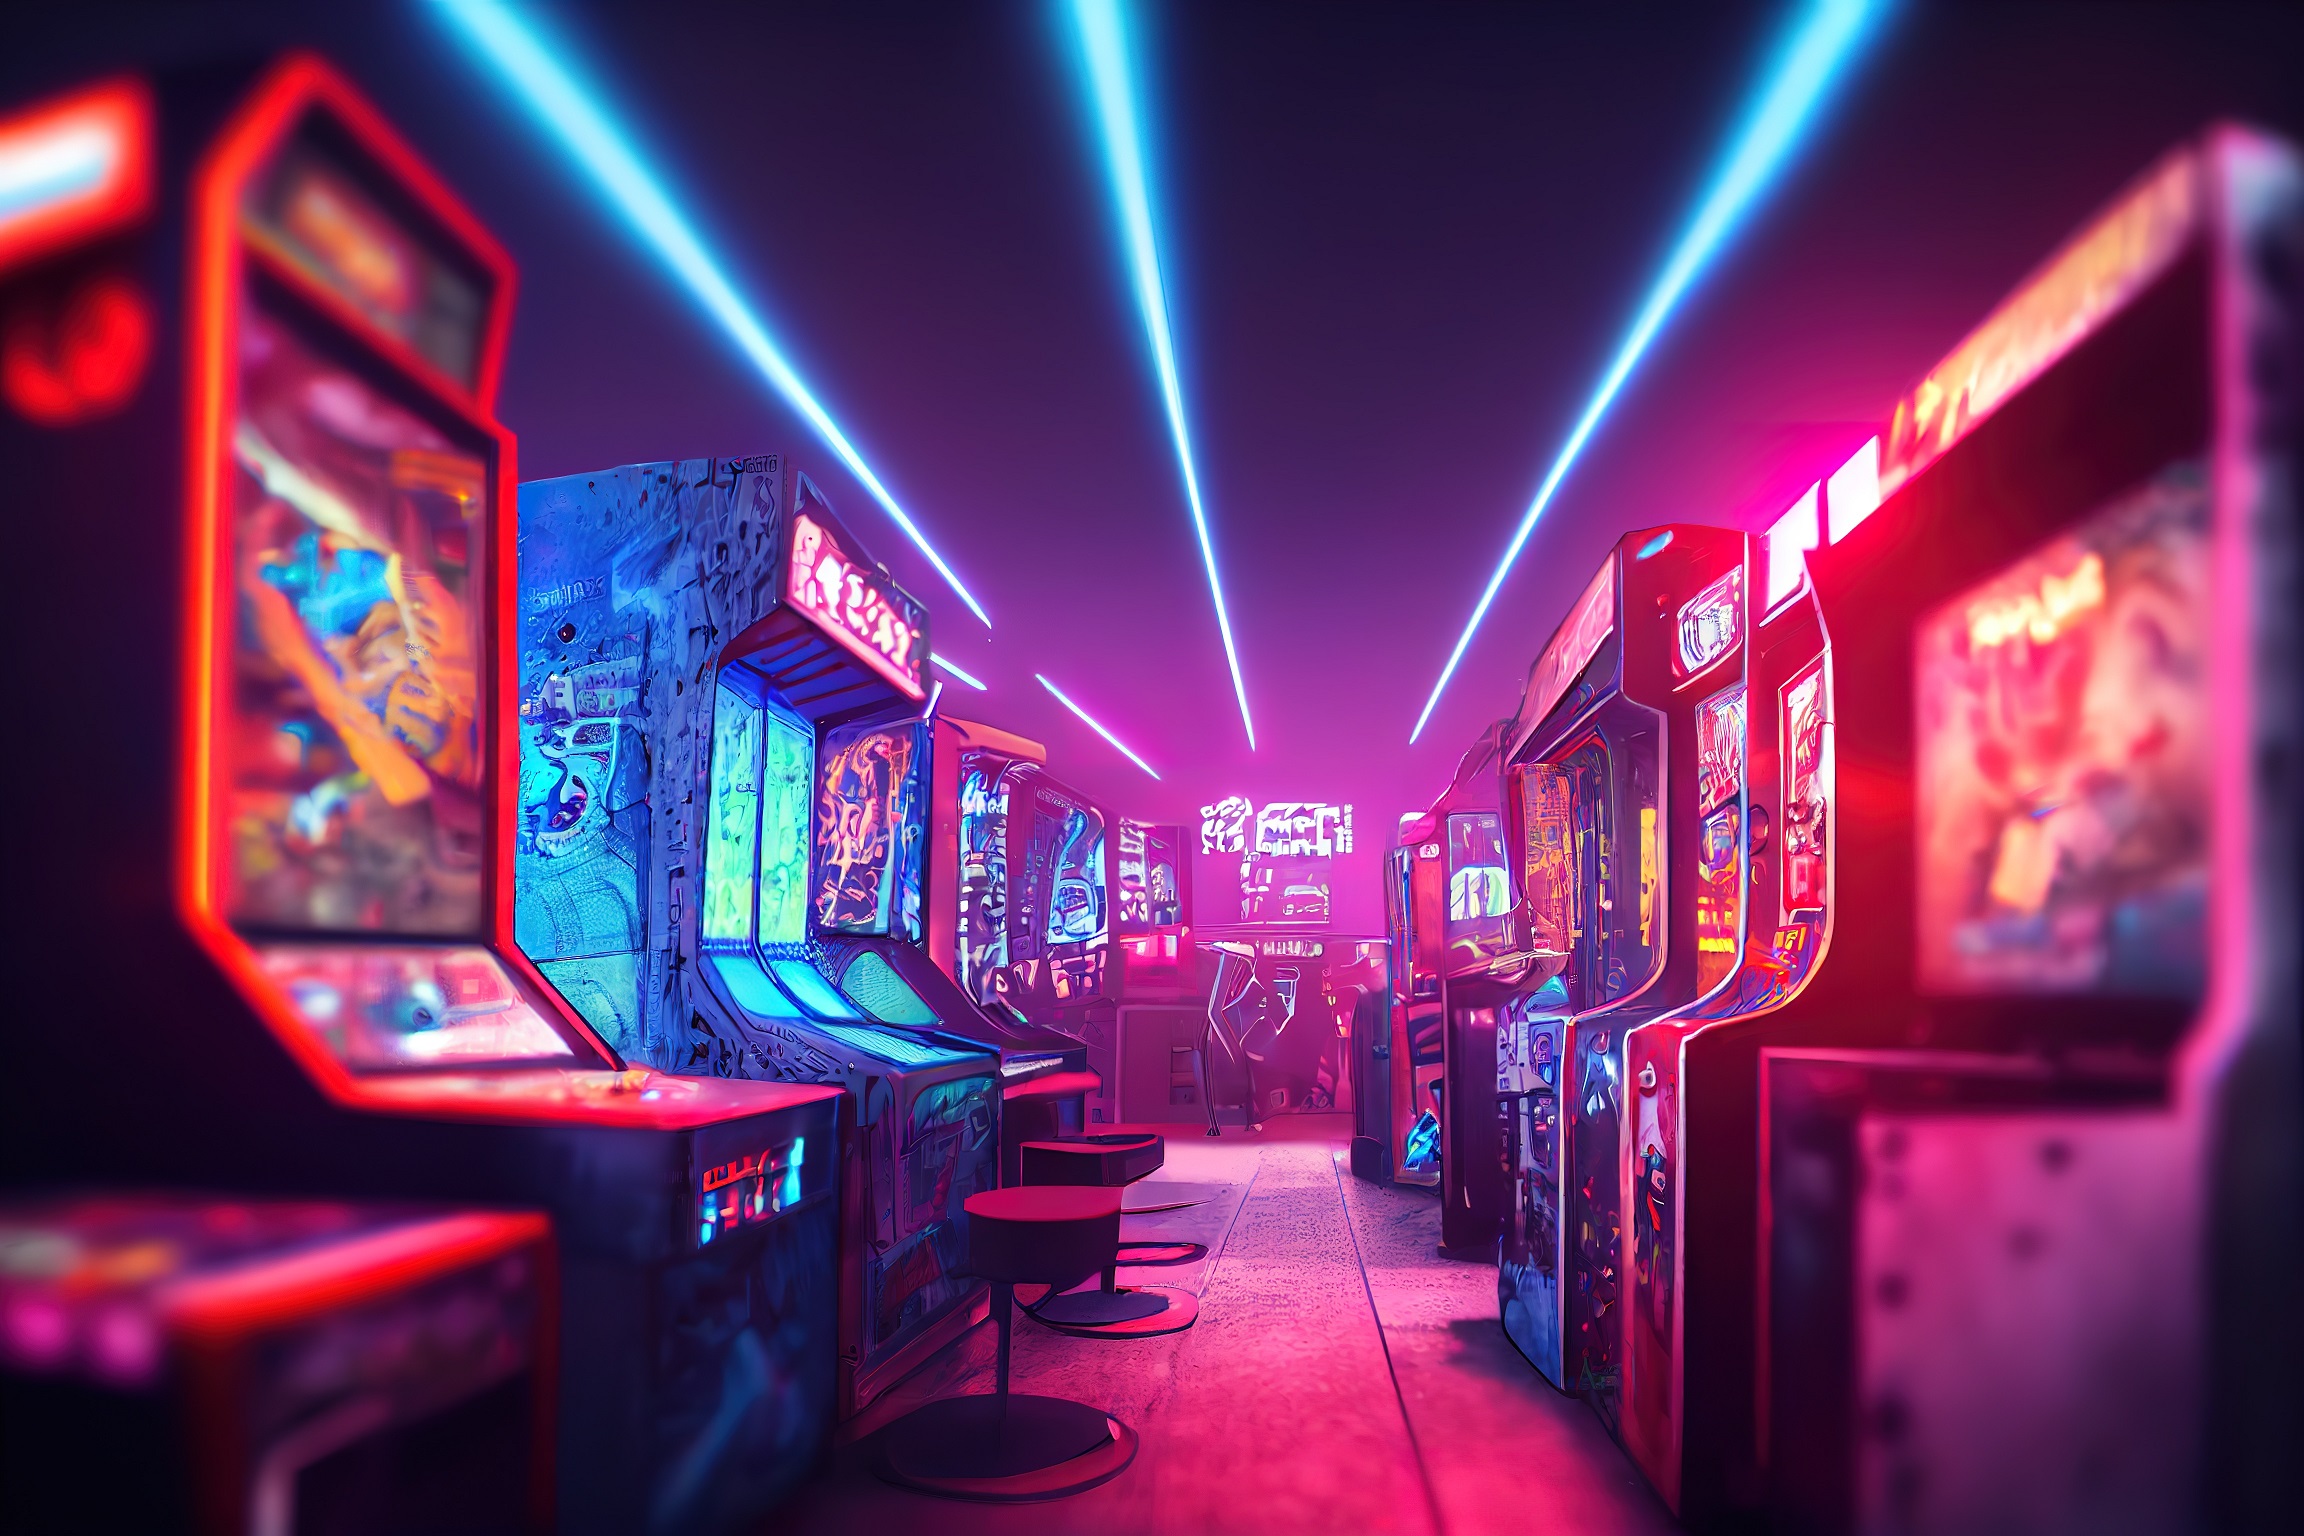 Arcade games - Not For Everyone